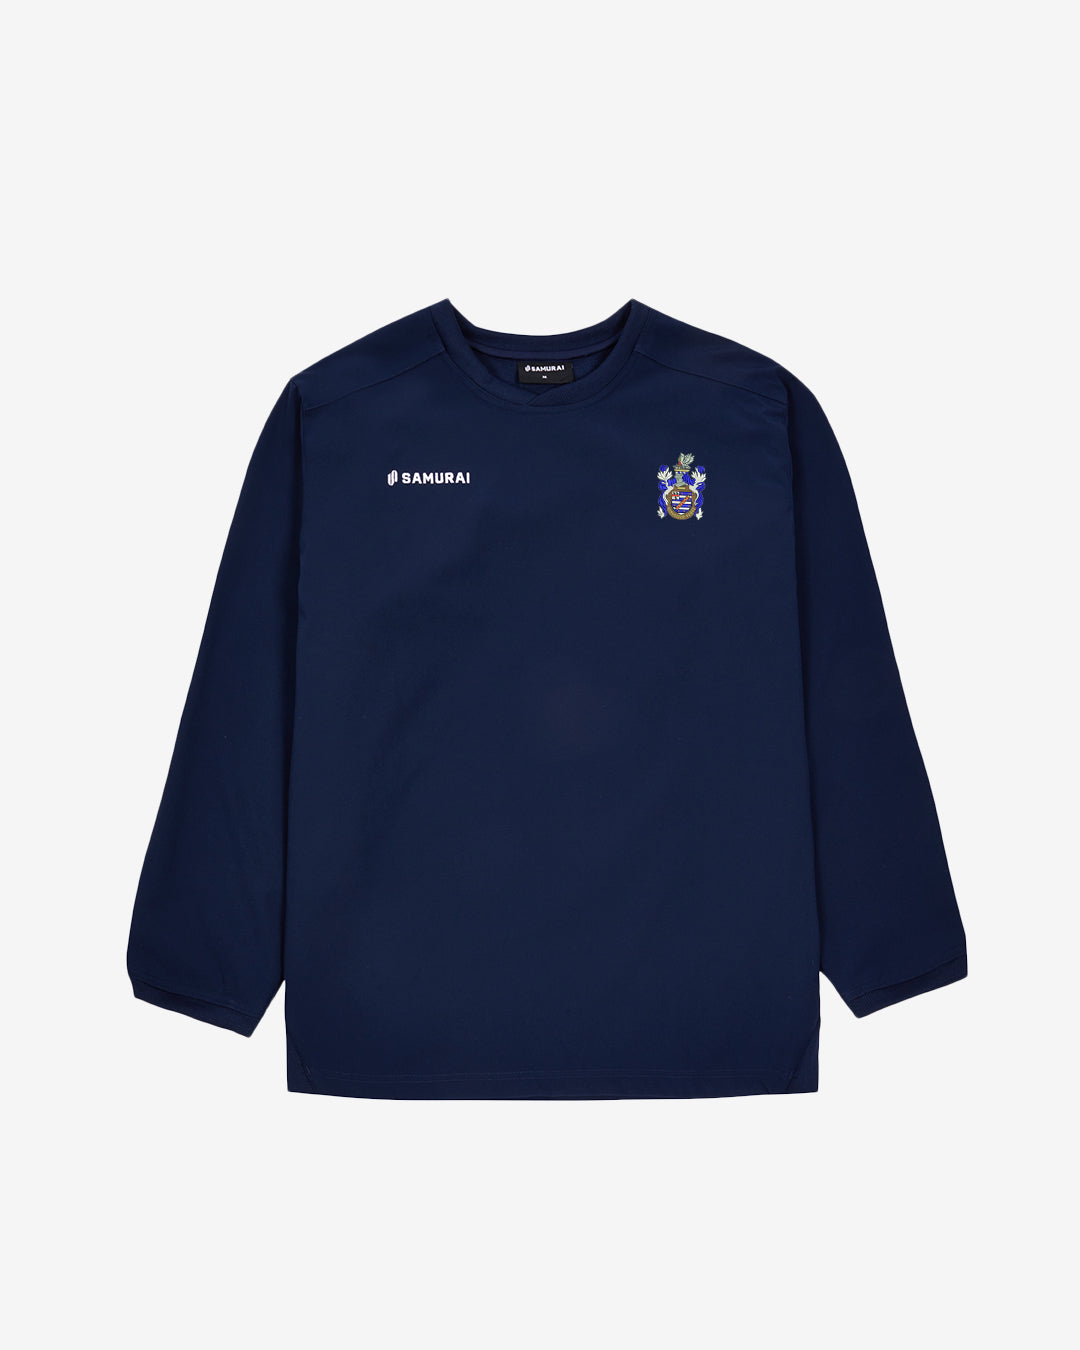 Skegness Rugby Club - EP:0107 - Shield Training Top - Navy